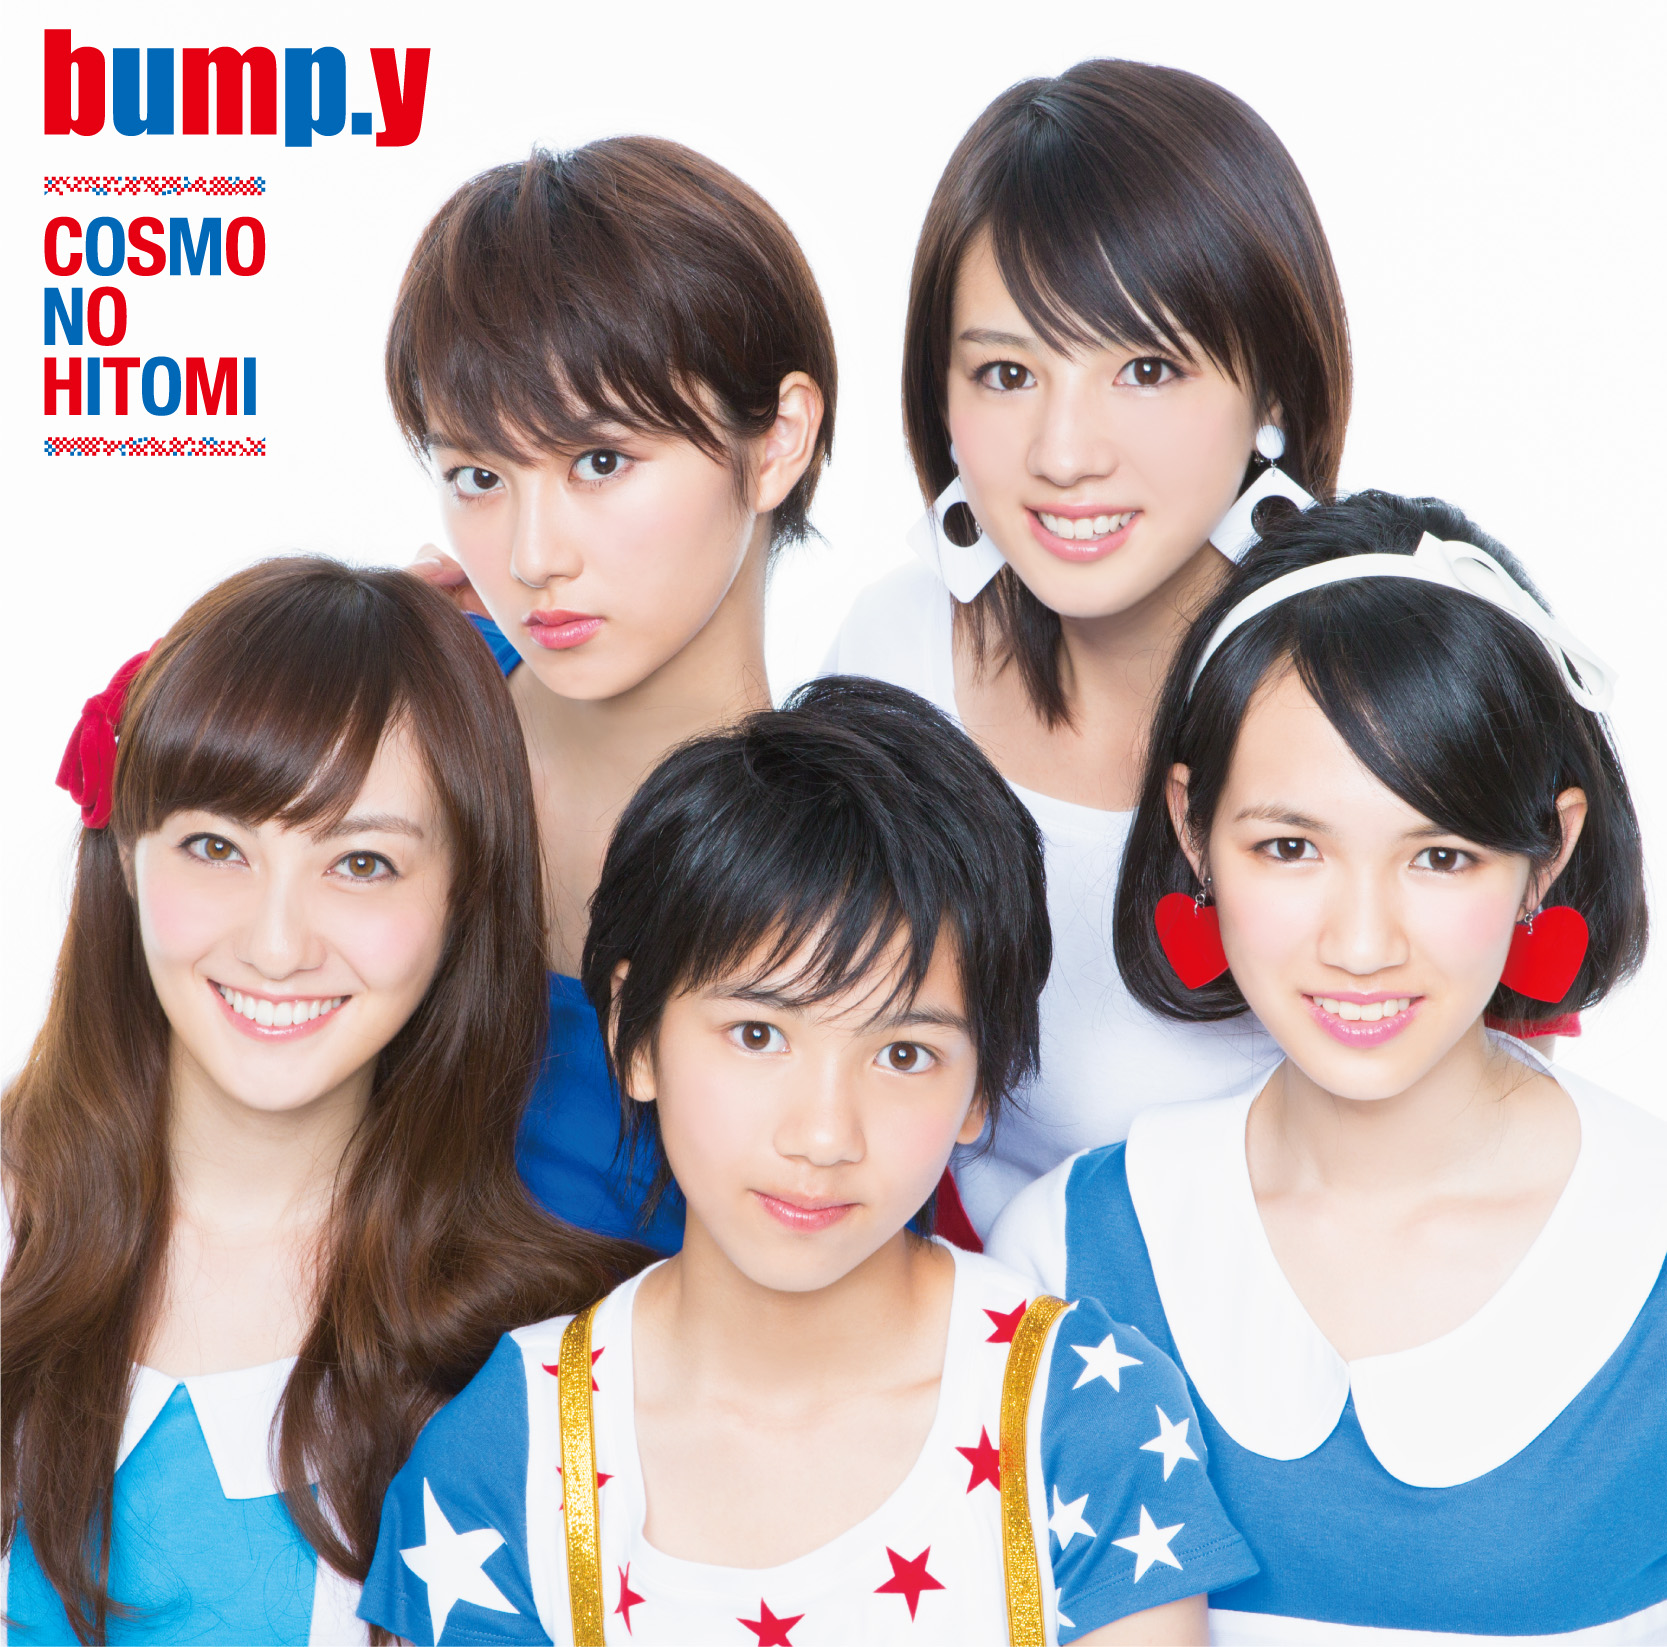 bump.y released the MV for their new single ”Cosmo no Hitomi” !